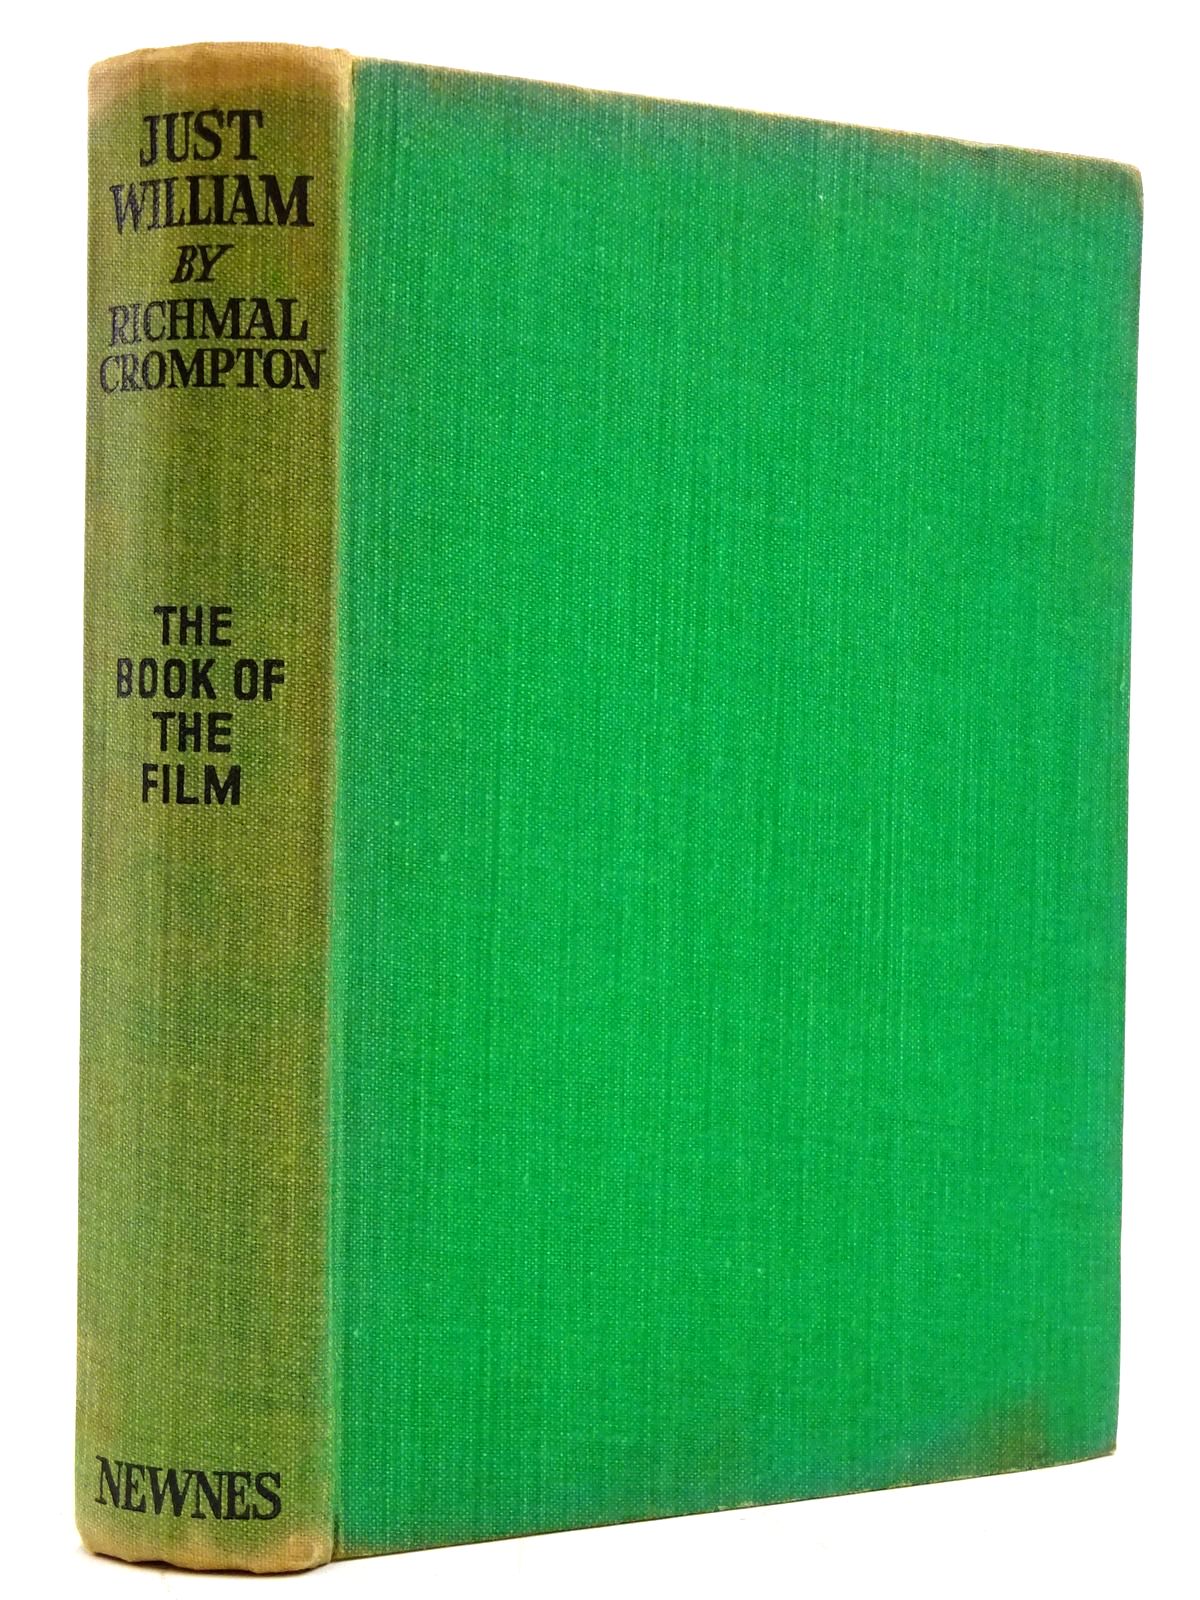 Photo of JUST WILLIAM - THE STORY OF THE FILM written by Crompton, Richmal published by George Newnes (STOCK CODE: 2131335)  for sale by Stella & Rose's Books